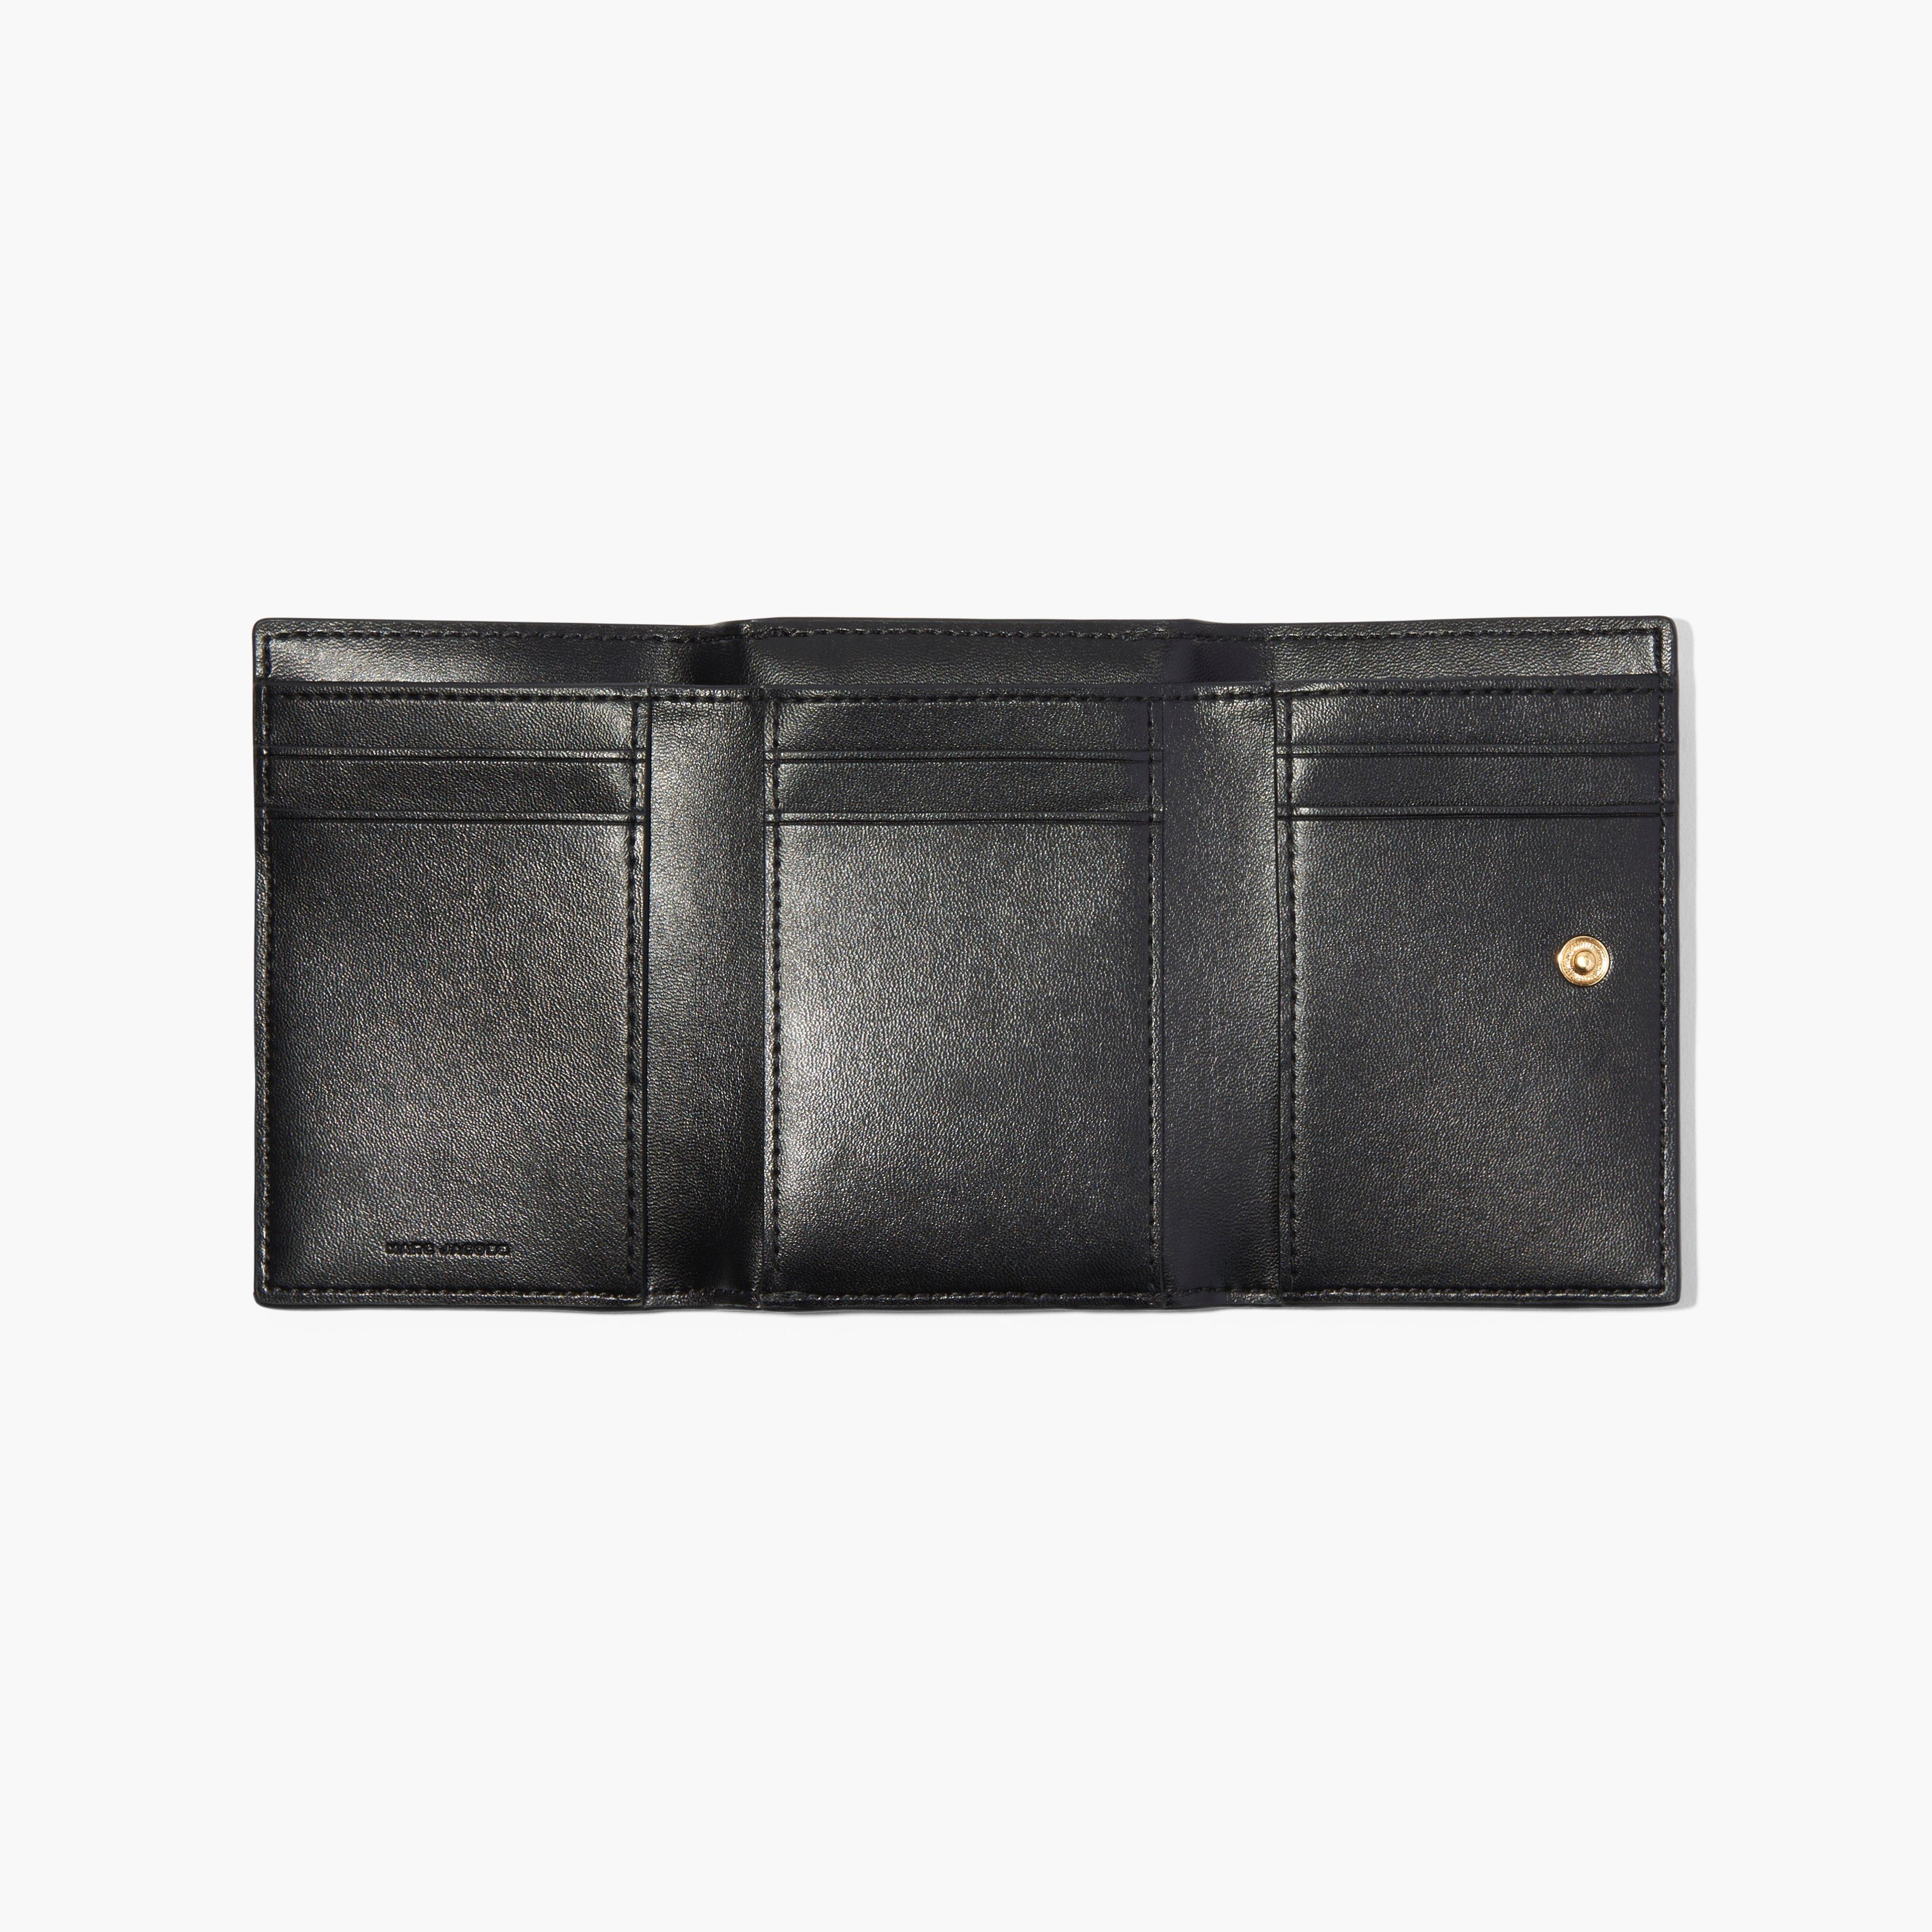 THE J MARC TRIFOLD WALLET - 4